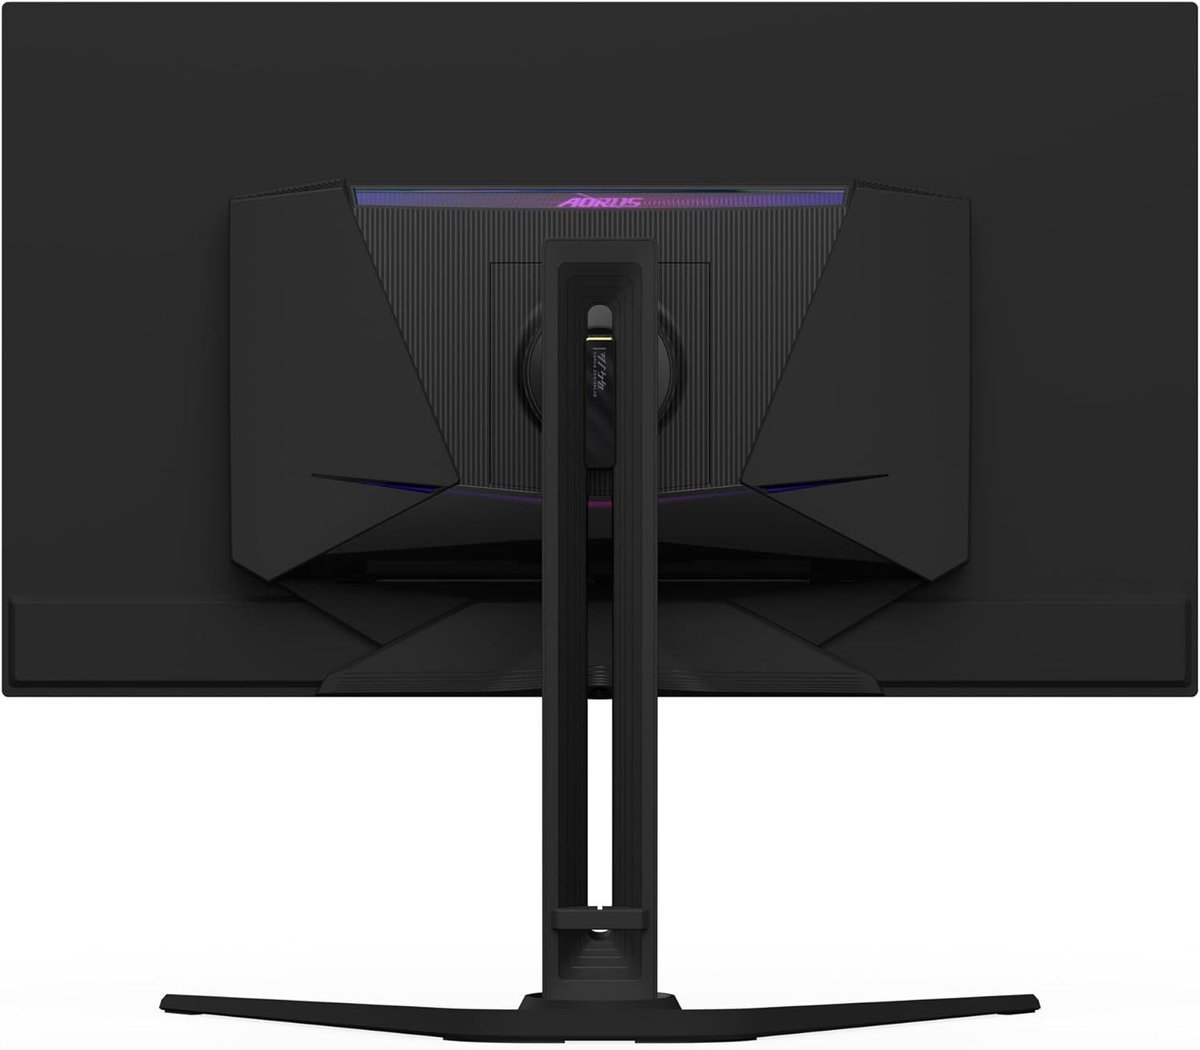 Looking for the ultimate gaming monitor? The Aorus FO32U2P is your pixel-packed hero with a 32-inch 4K OLED, 240Hz refresh rate, and 0.03ms response time. It's so fast, it practically bends time! #GamingMonitor #TechReview #Aorus #OLED buff.ly/3wMF9K8